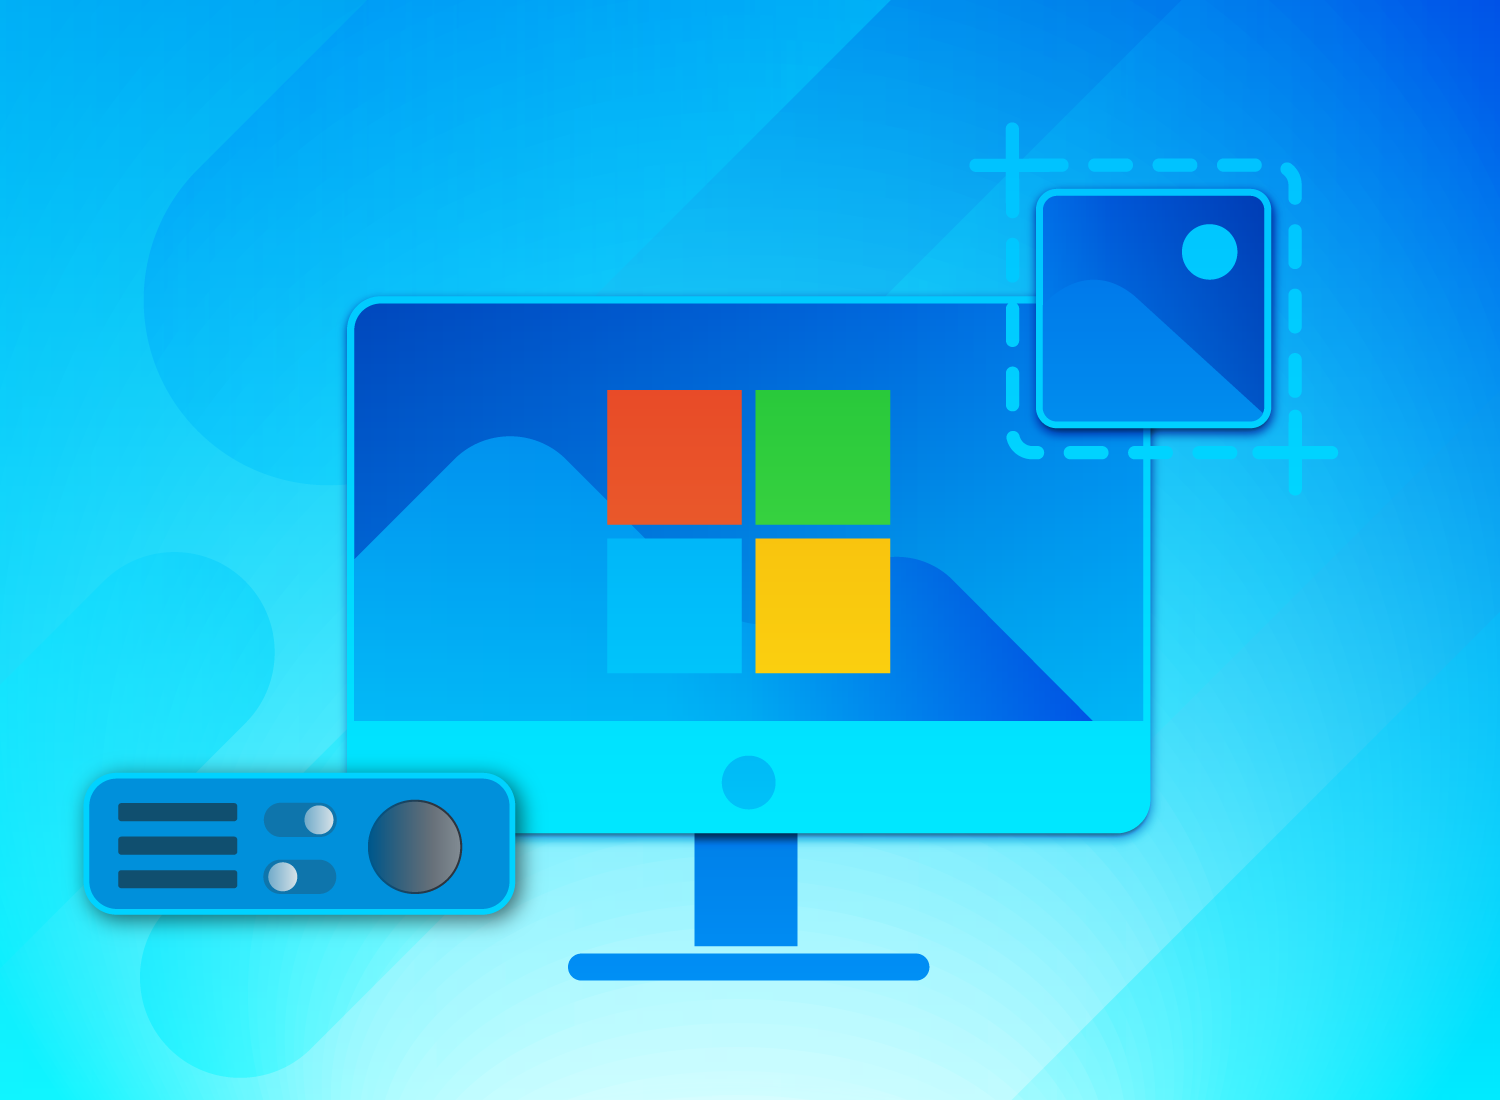 Digital illustration of a desktop computer with a Windows logo on the screen, indicating a guide for screen recording on a Windows operating system. A camera icon with focus brackets is positioned to the right of the monitor, symbolizing a webcam or video capture function. A control panel with buttons and dials is seen to the left of the screen, suggesting software tools for video recording.